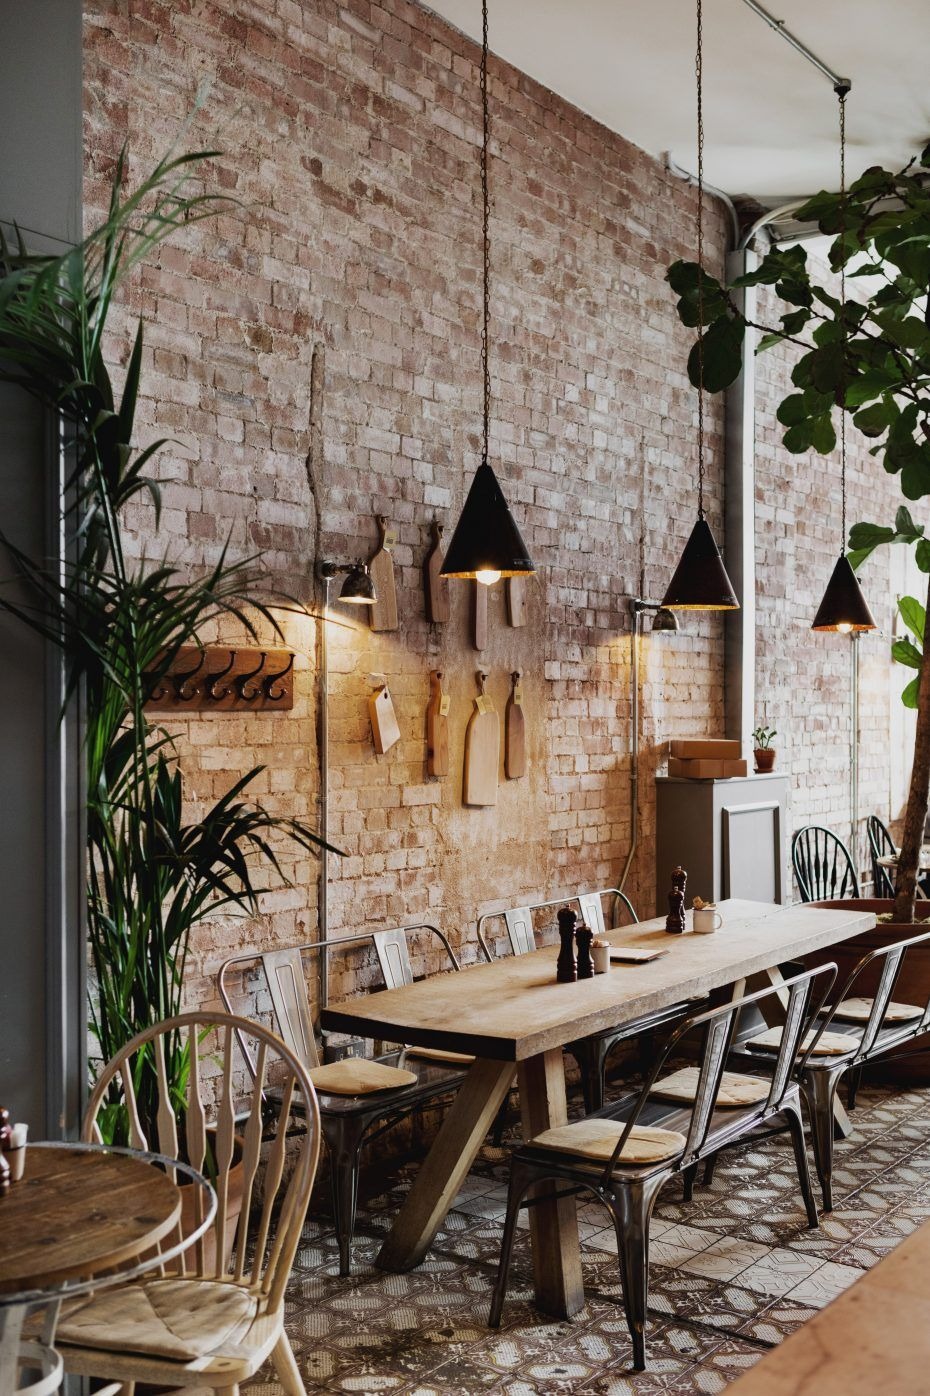 Combining the Grunge Dining Room and Rustic Furniture